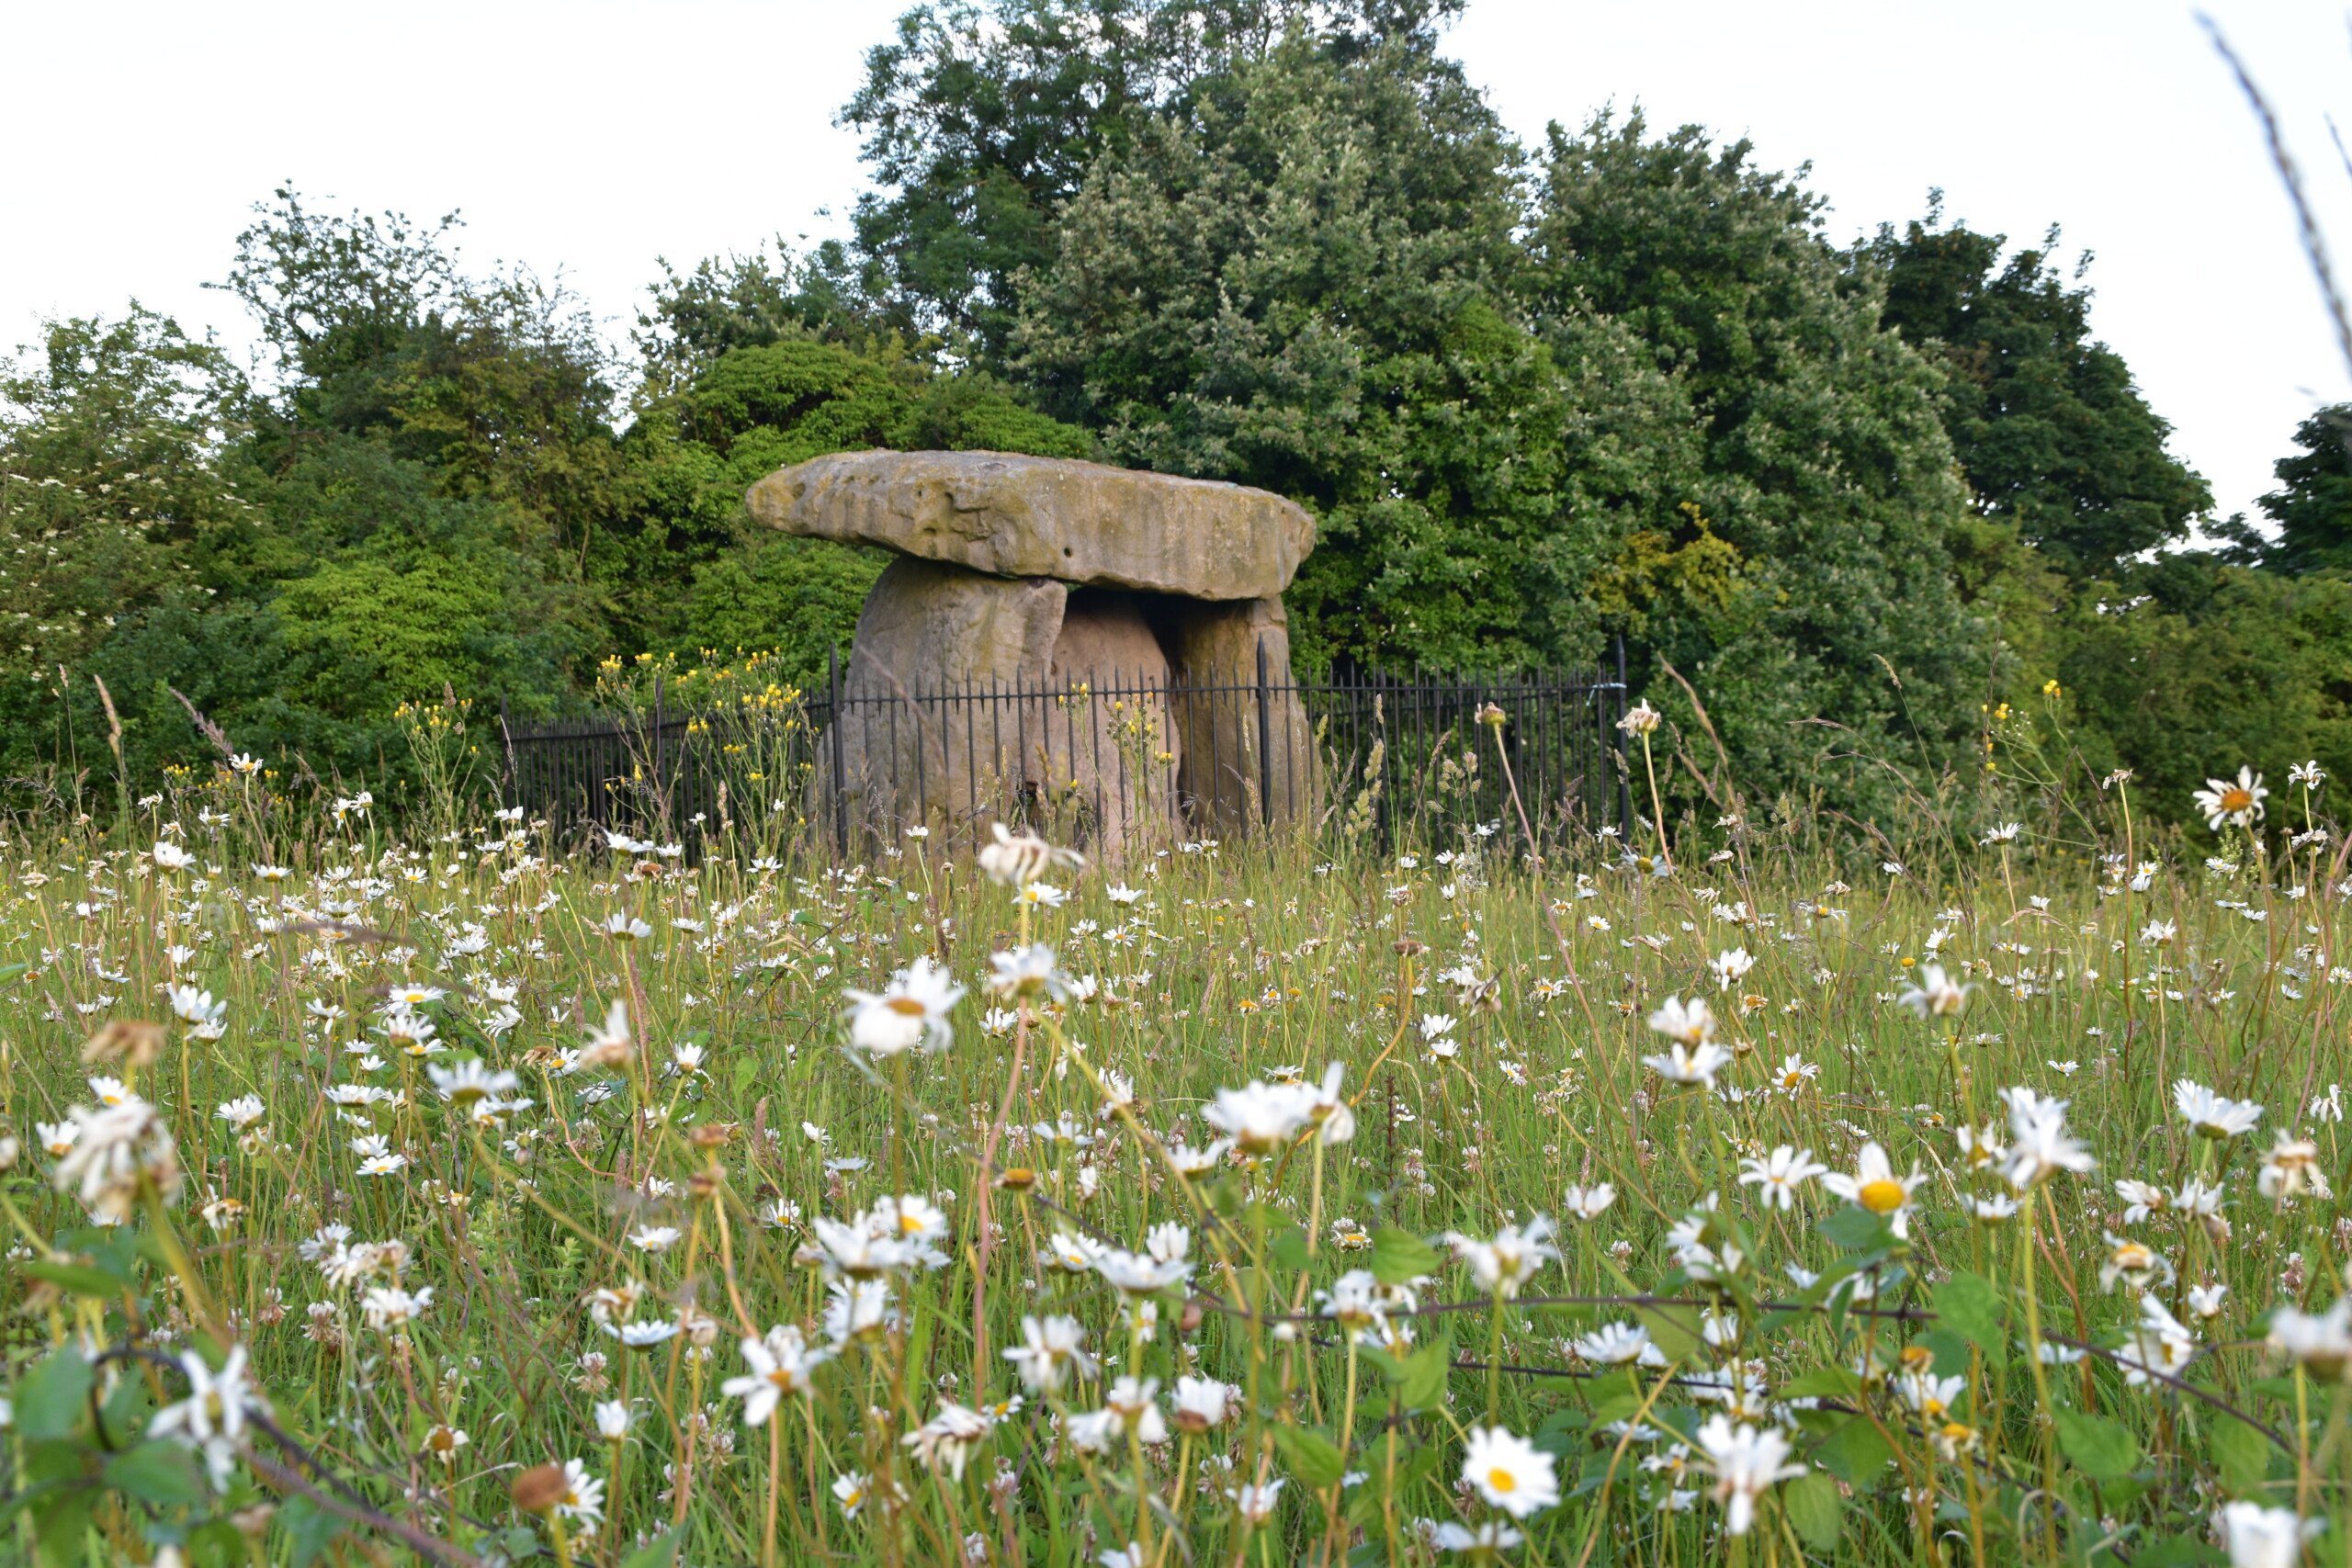 NORTH DOWNS WAY Kit's Coty, a Neolithic burial site, with daisies in the foreground